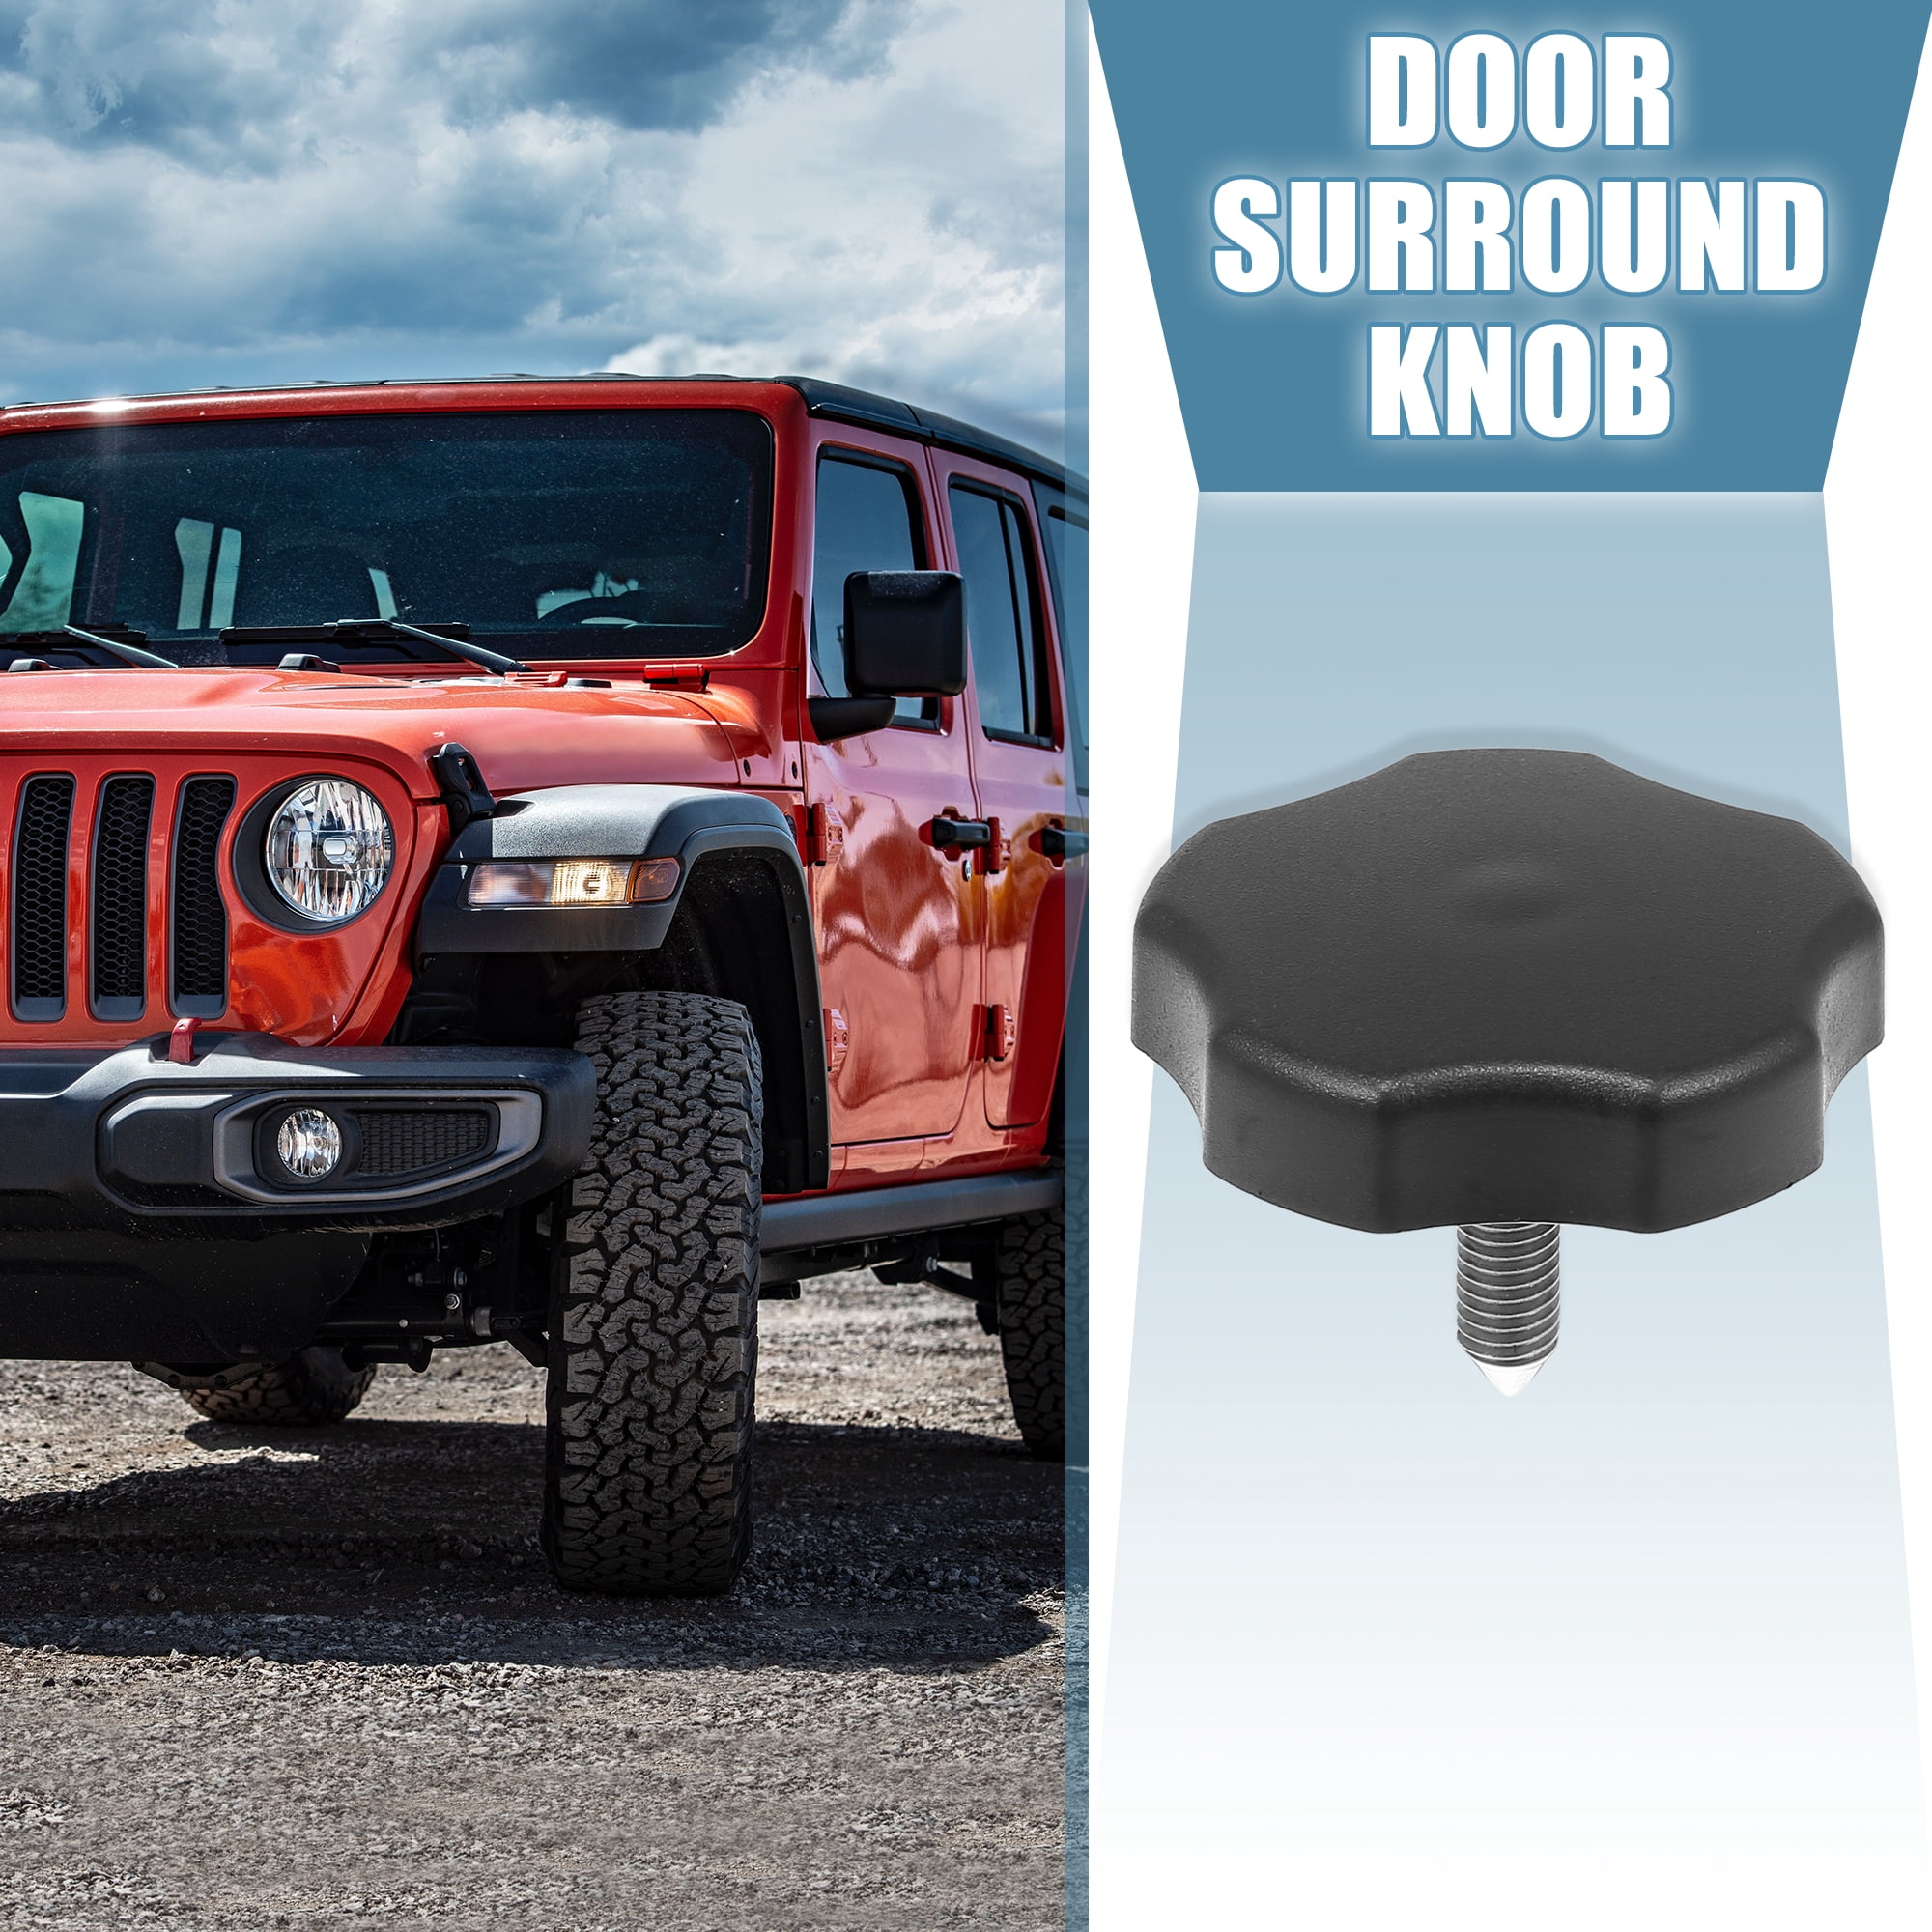 Short Soft Top Door Surround Knob Window Frame with Pin for Jeep Wrangler JK  2007-2018 for Jeep Wrangler TJ 1997-2000 | Walmart Canada